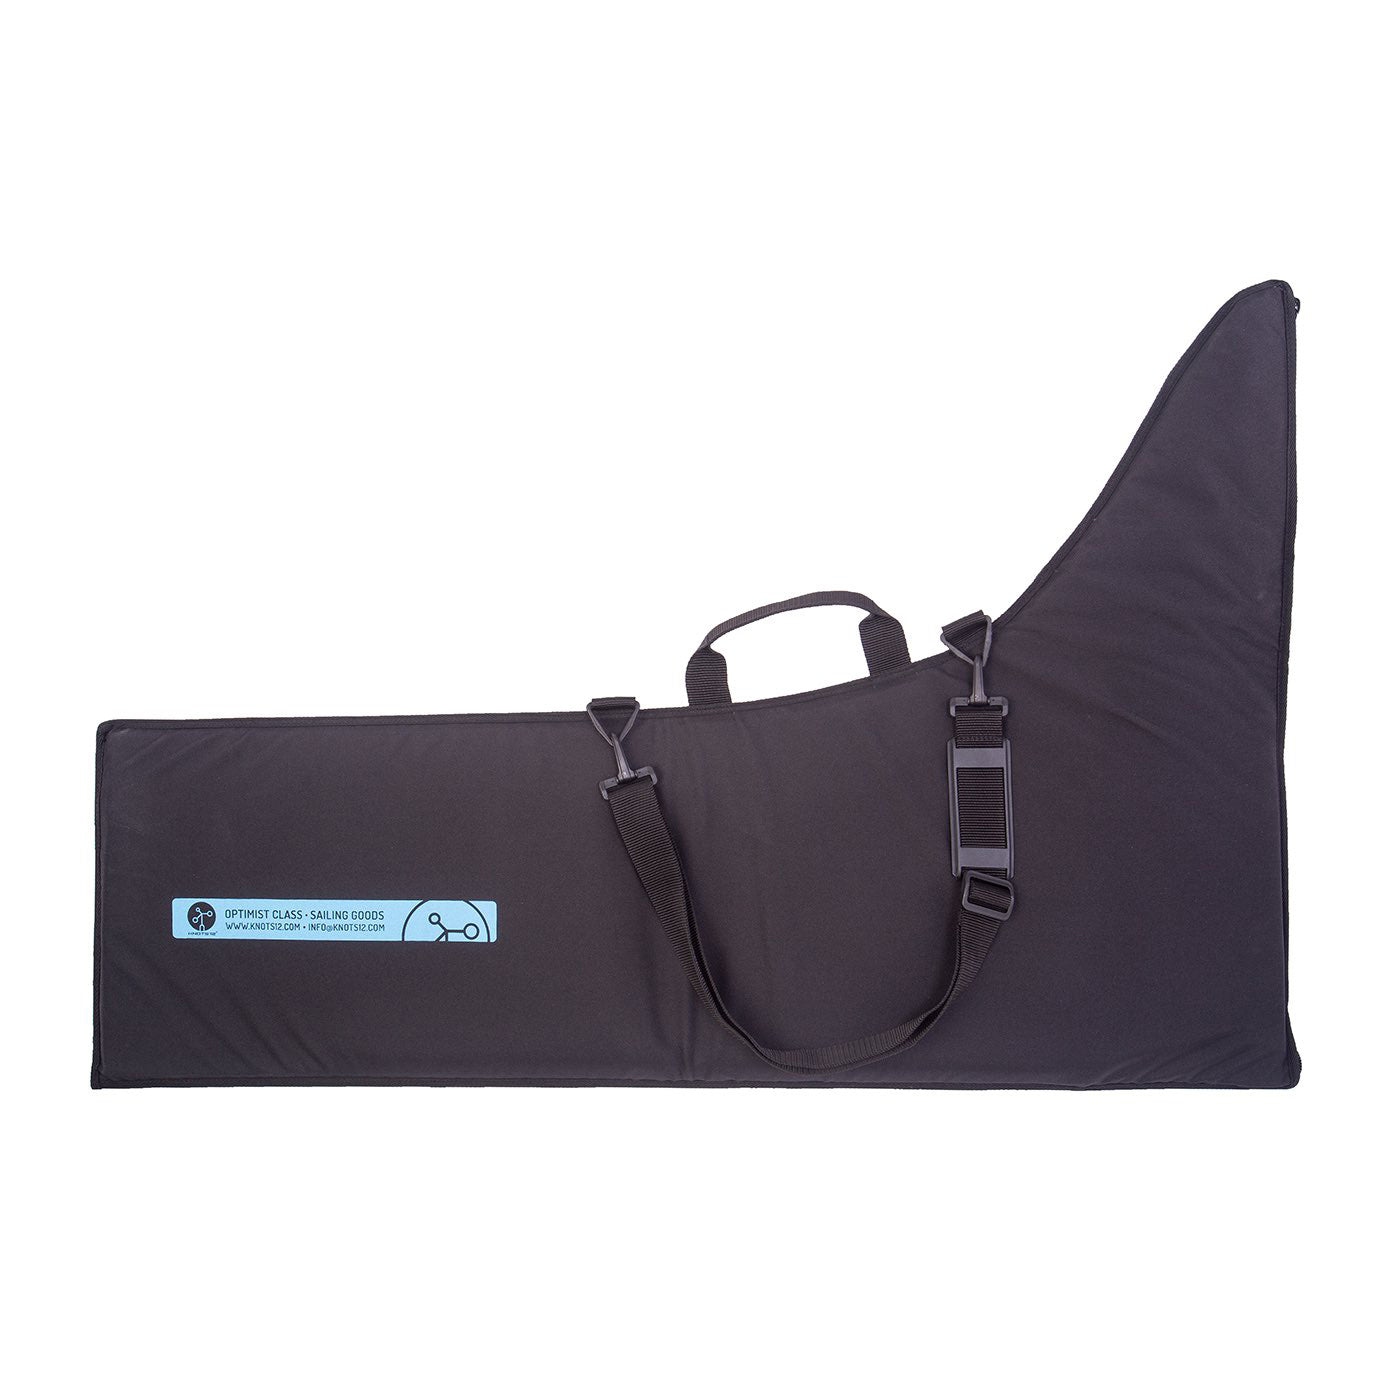 &quot;Knots12 Optimist centerboard padded cover bag EAN / GTIN code: 4744422010136,  The bag is made of high-quality materials, PU600, polyester, and 3mm polyurethane foam. It is water-repellent, while at the same time &quot;&quot;breathable&quot;&quot;. Bags back side is black with blue print.&quot;